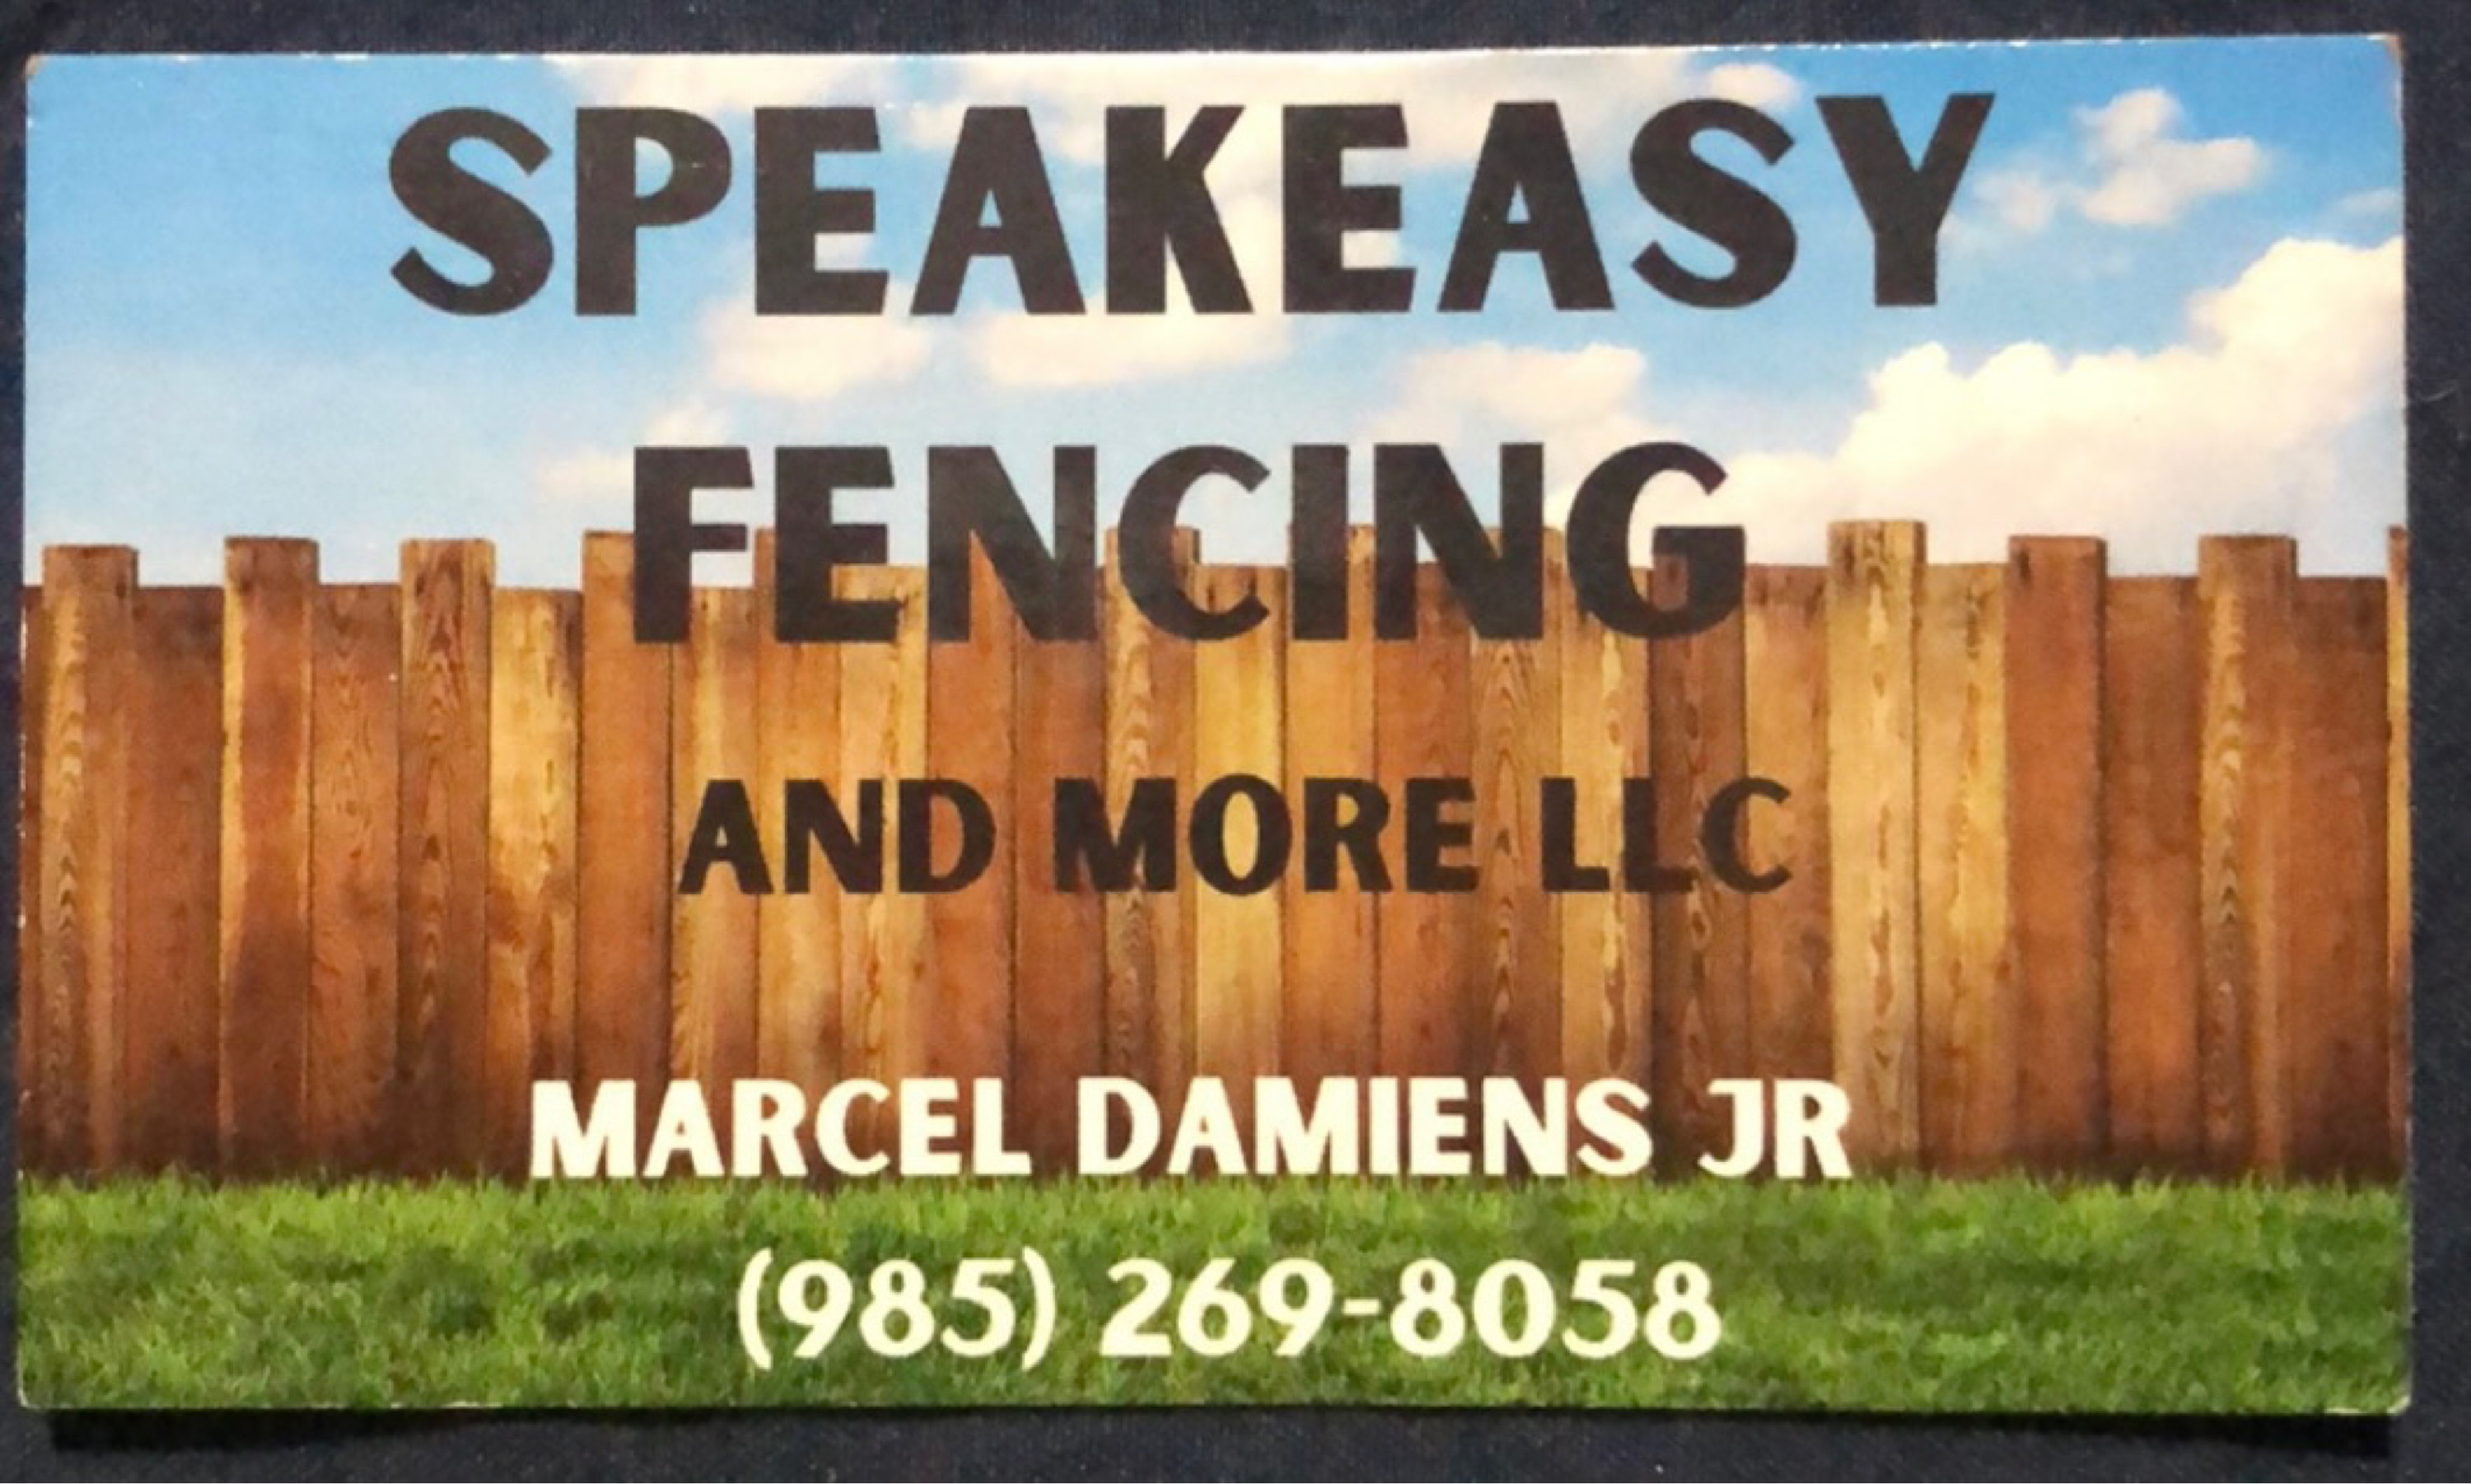 Speakeasy Fencing and More Logo